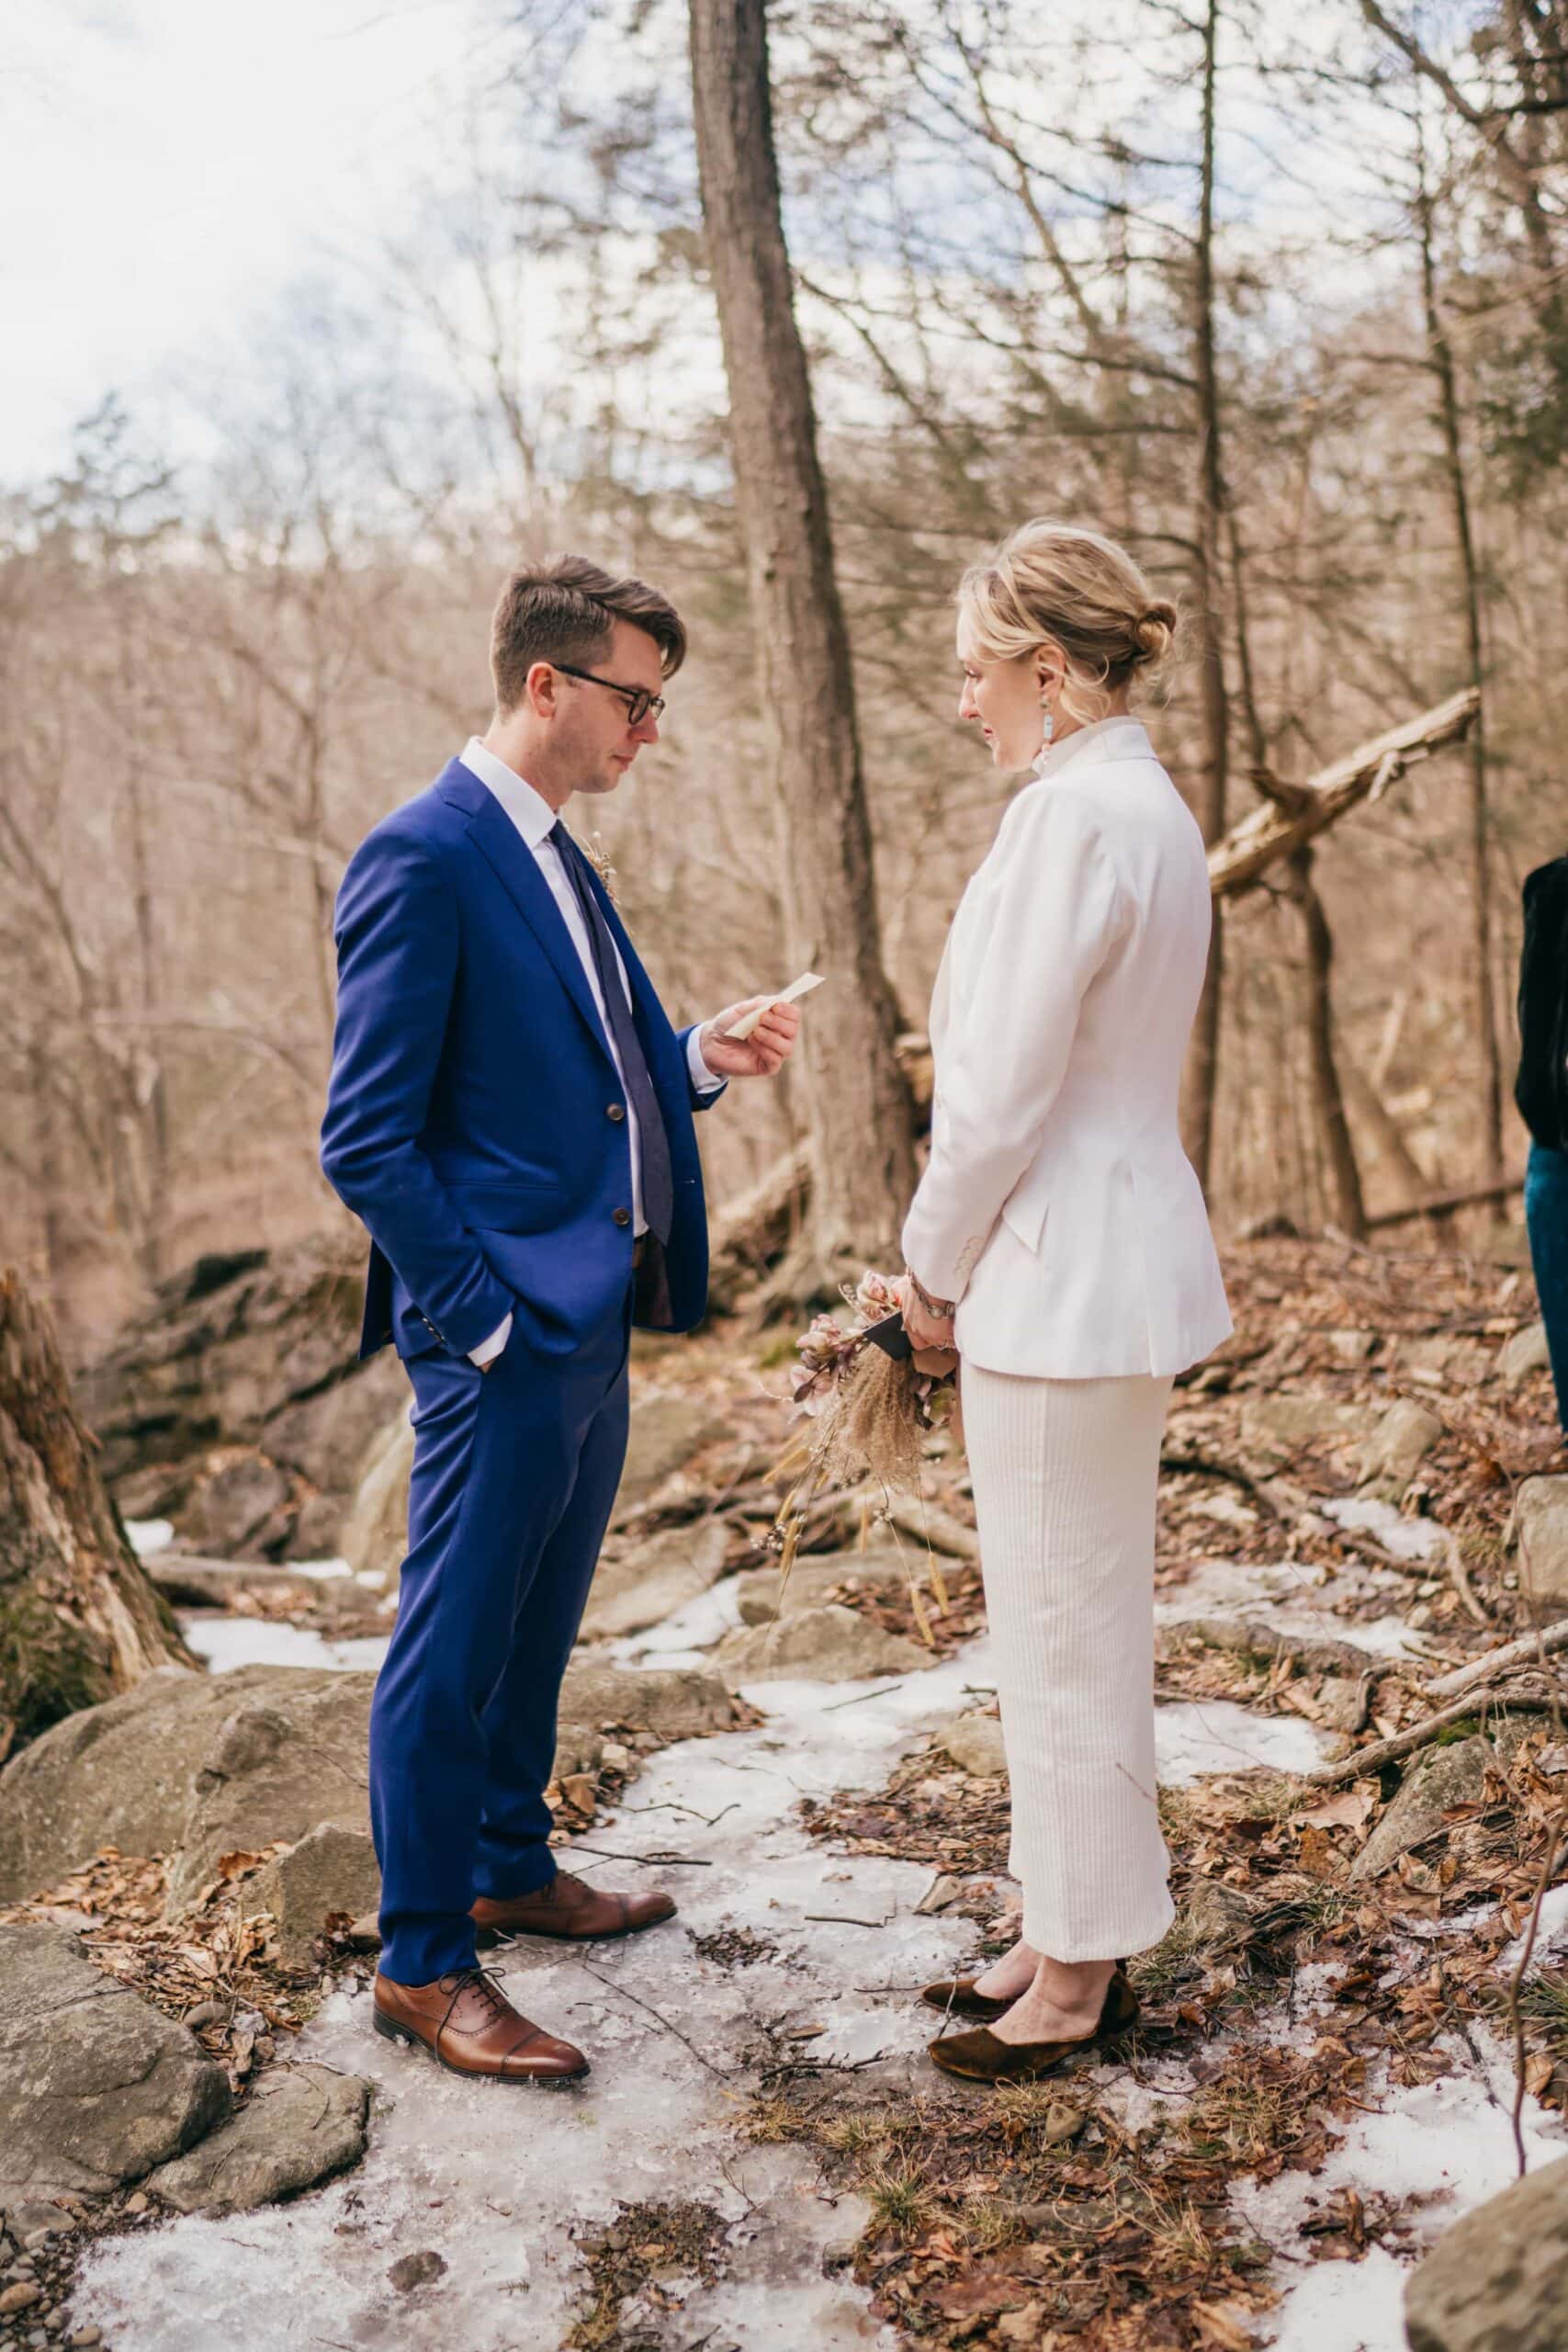 Groom reads bride vows during ceremony in Hudson Valley winter forest.